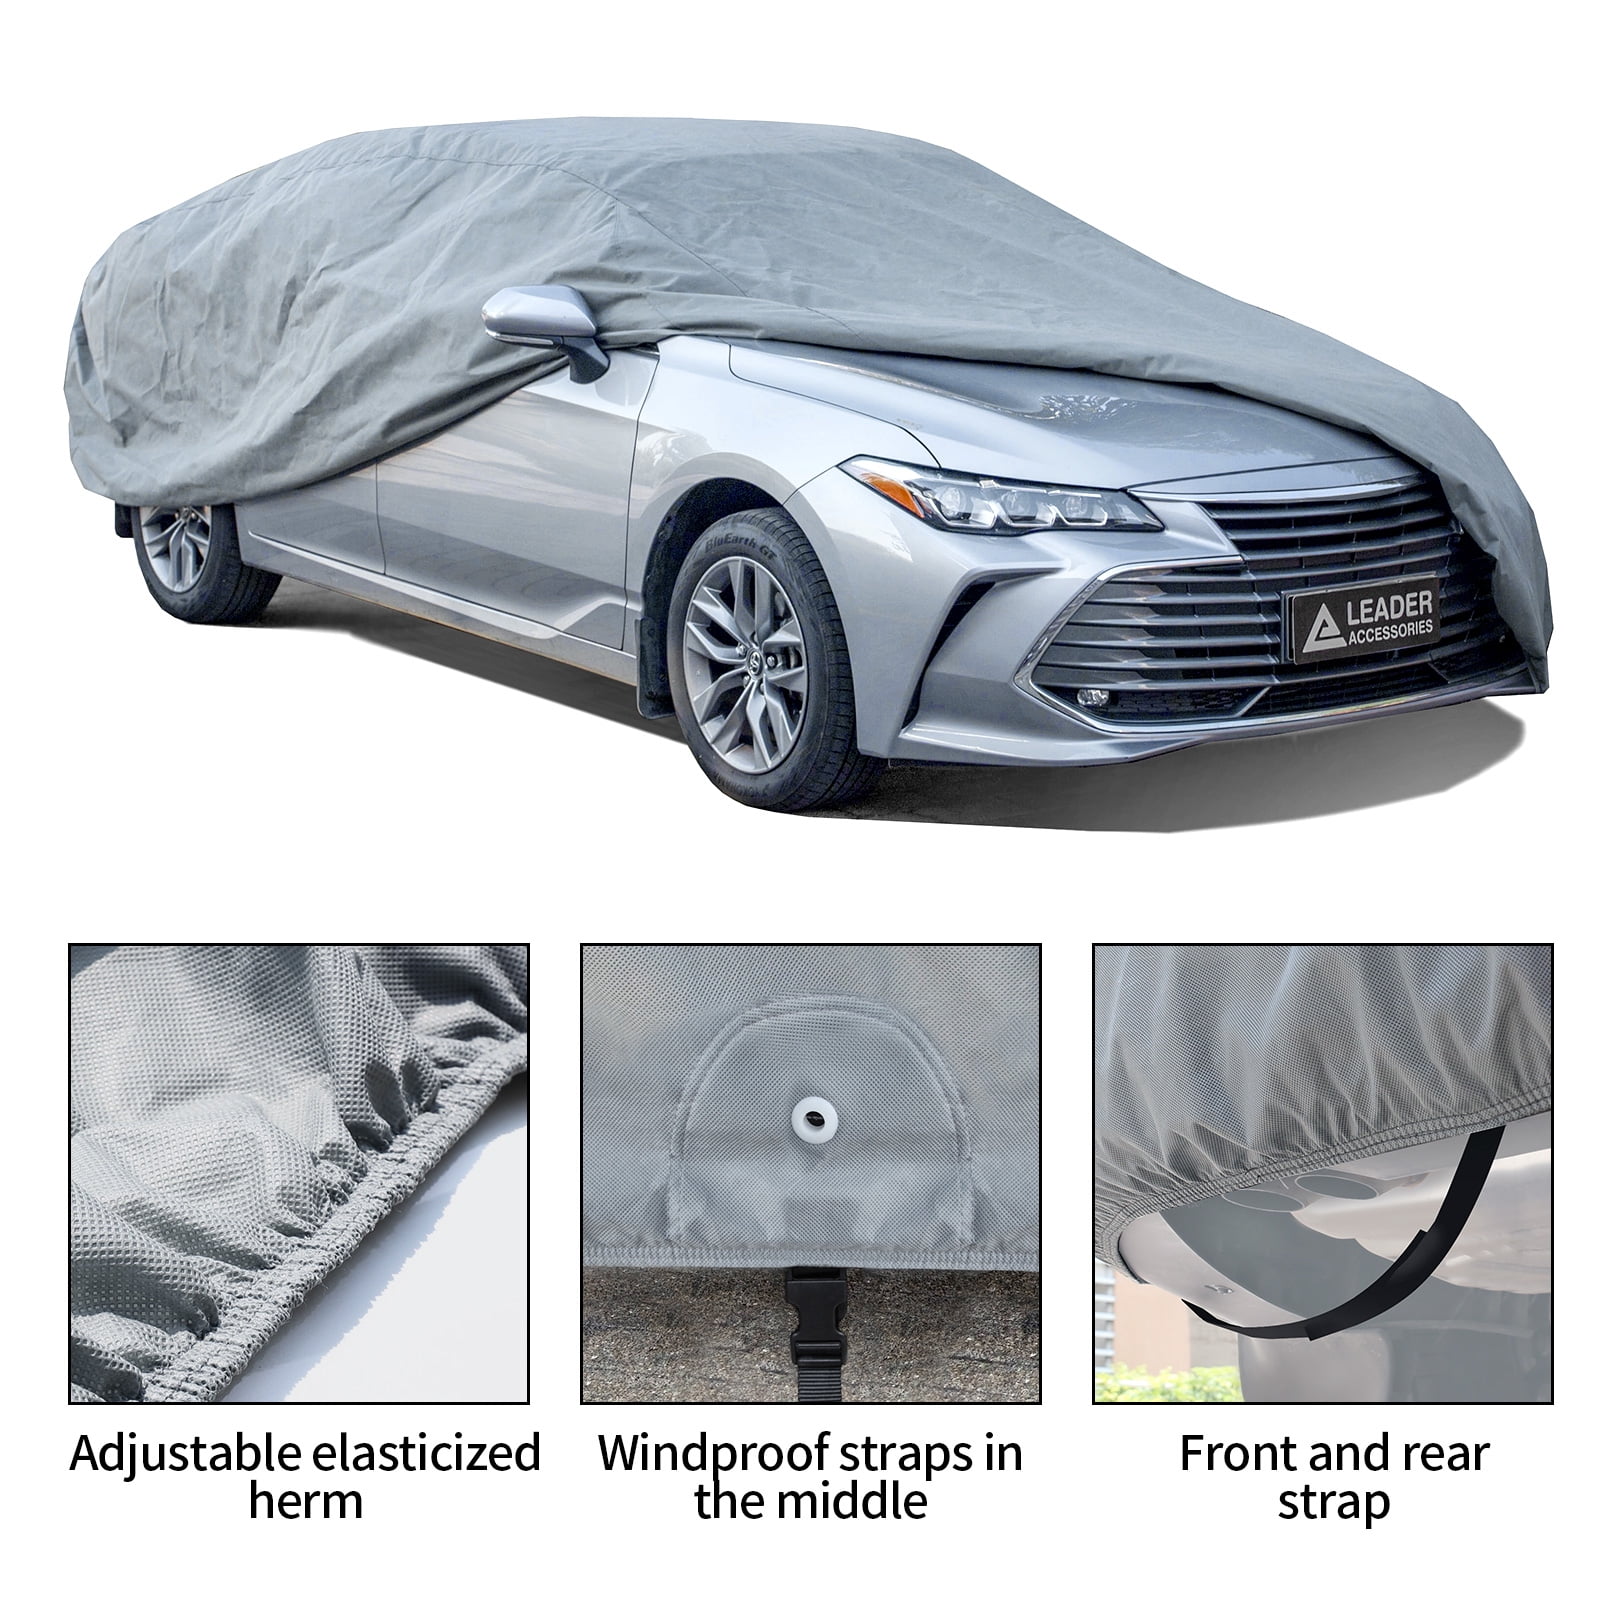 Leader Accessories 5 Layers SUV Cover 100% Waterproof UV Rays Resistant Outdoor Indoor Use SUV up to 187 